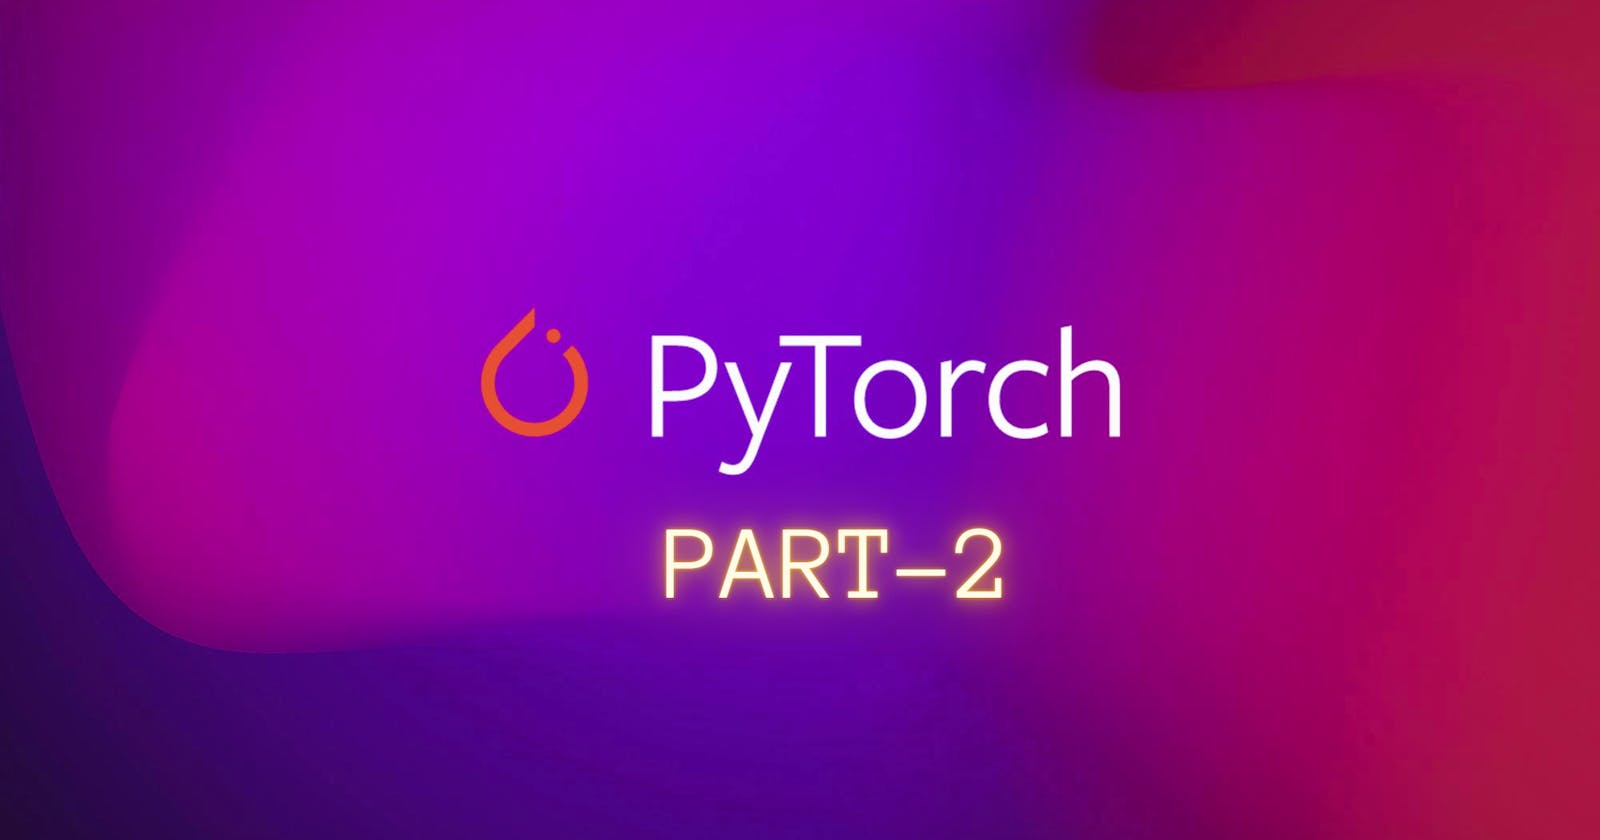 Getting started on DeepLearning with "PyTorch" - PART 2